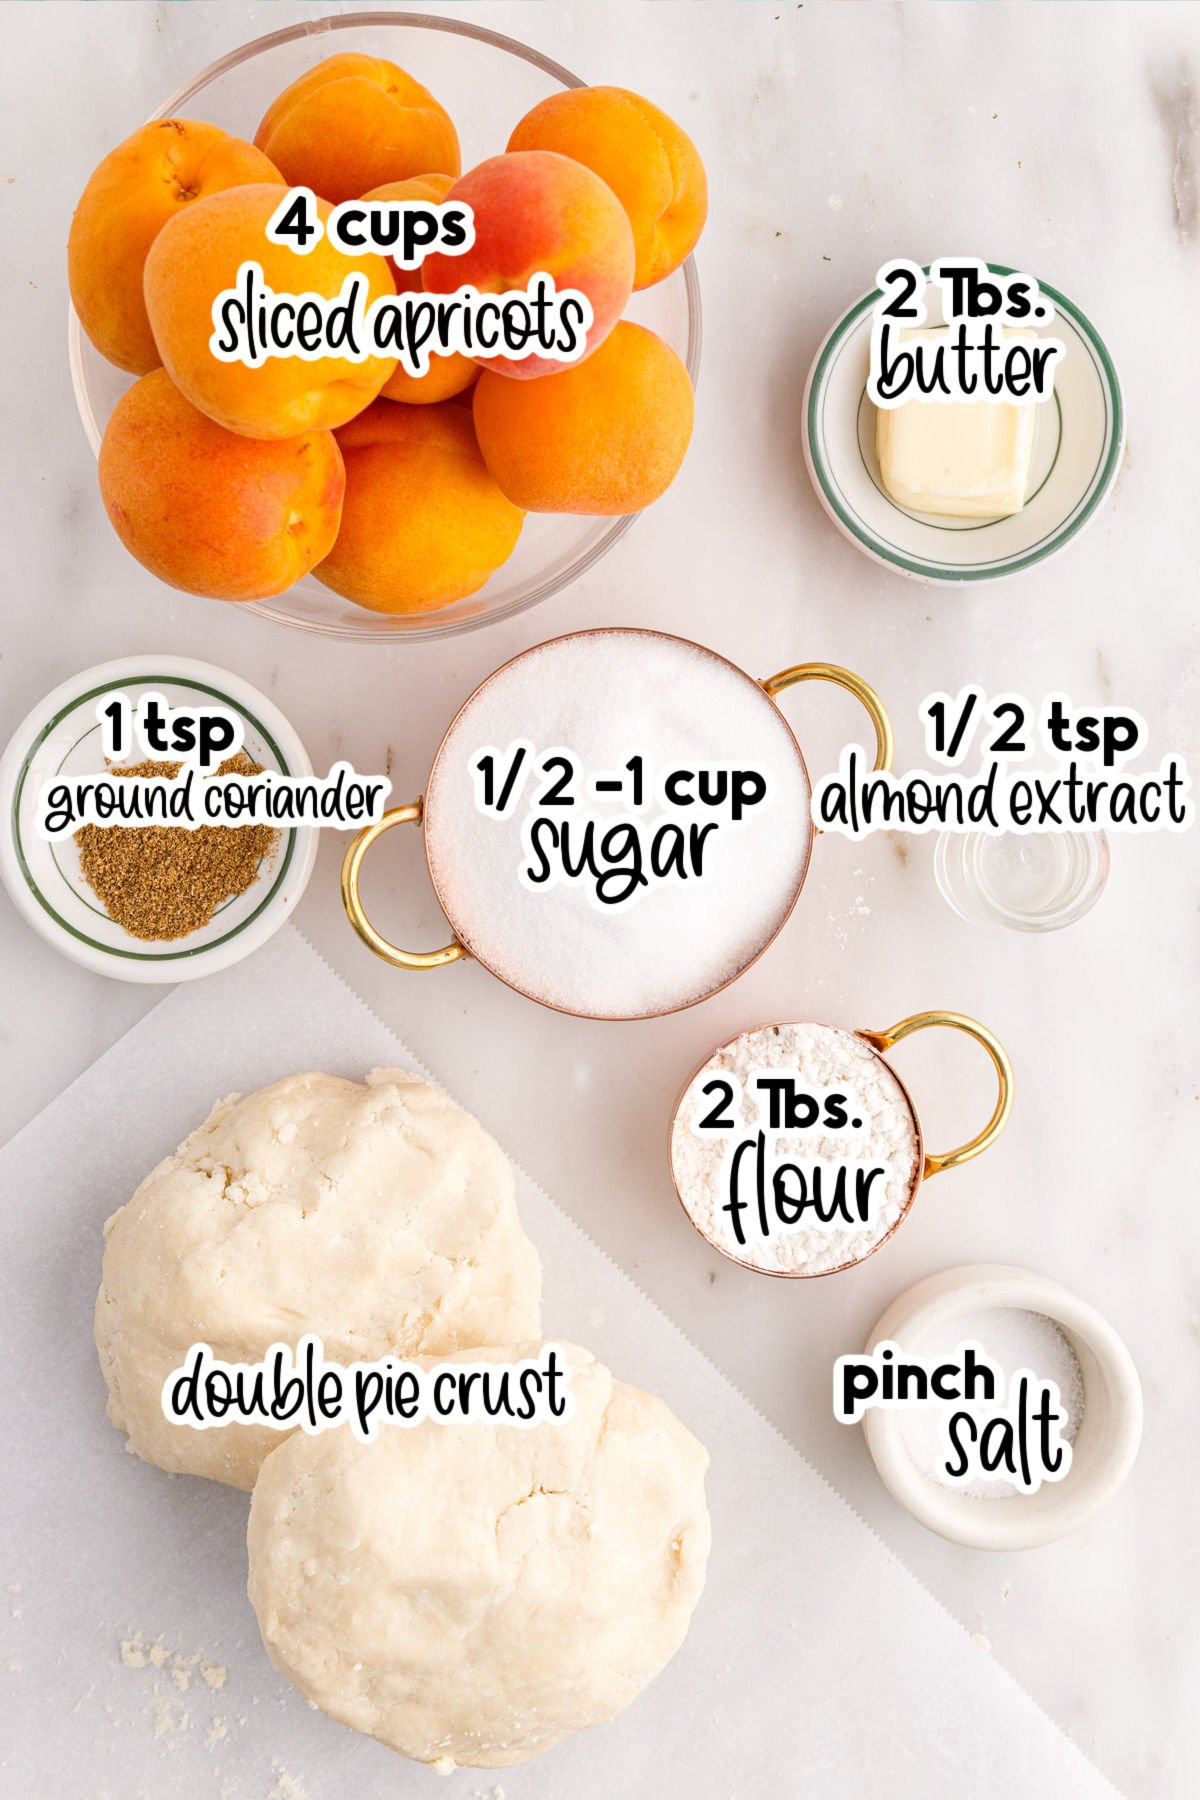 Individual ingredients for apricot pie, with text labels and amounts.